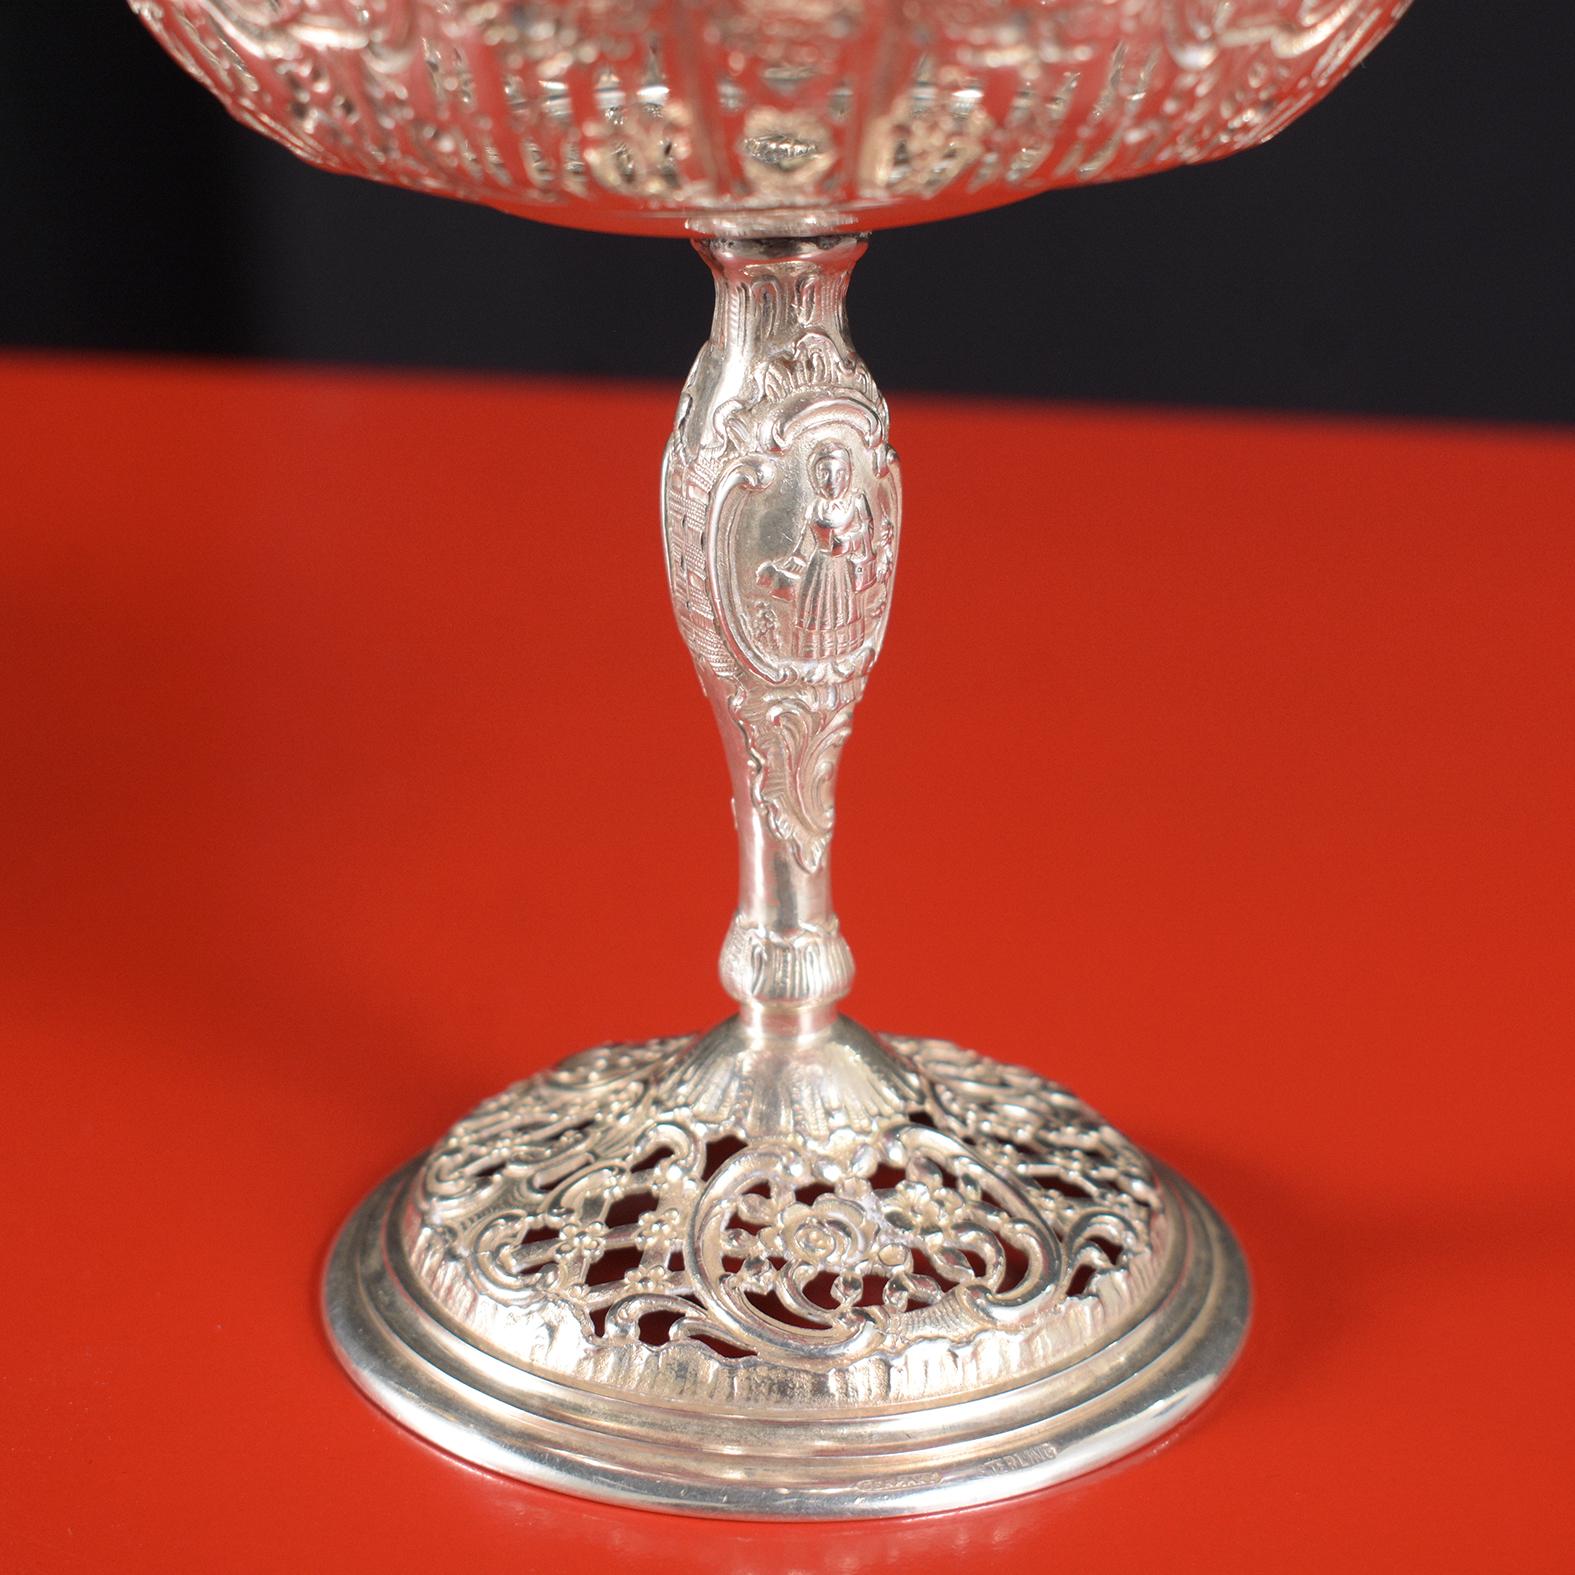 German 1970s Sterling Silver Compote: Delicate Intricate Design & Timeless Elegance